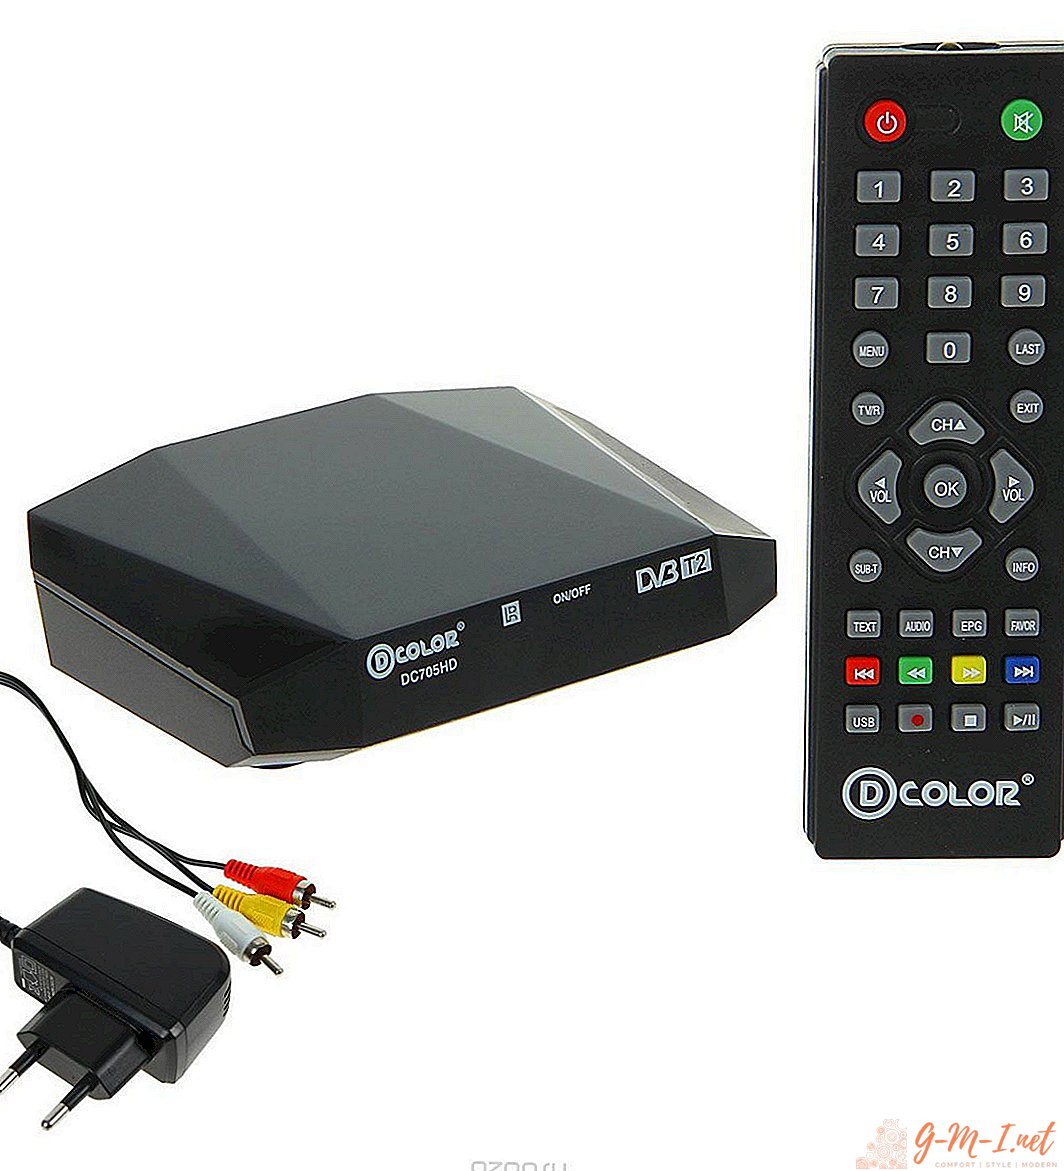 TV tuners for TV which is better